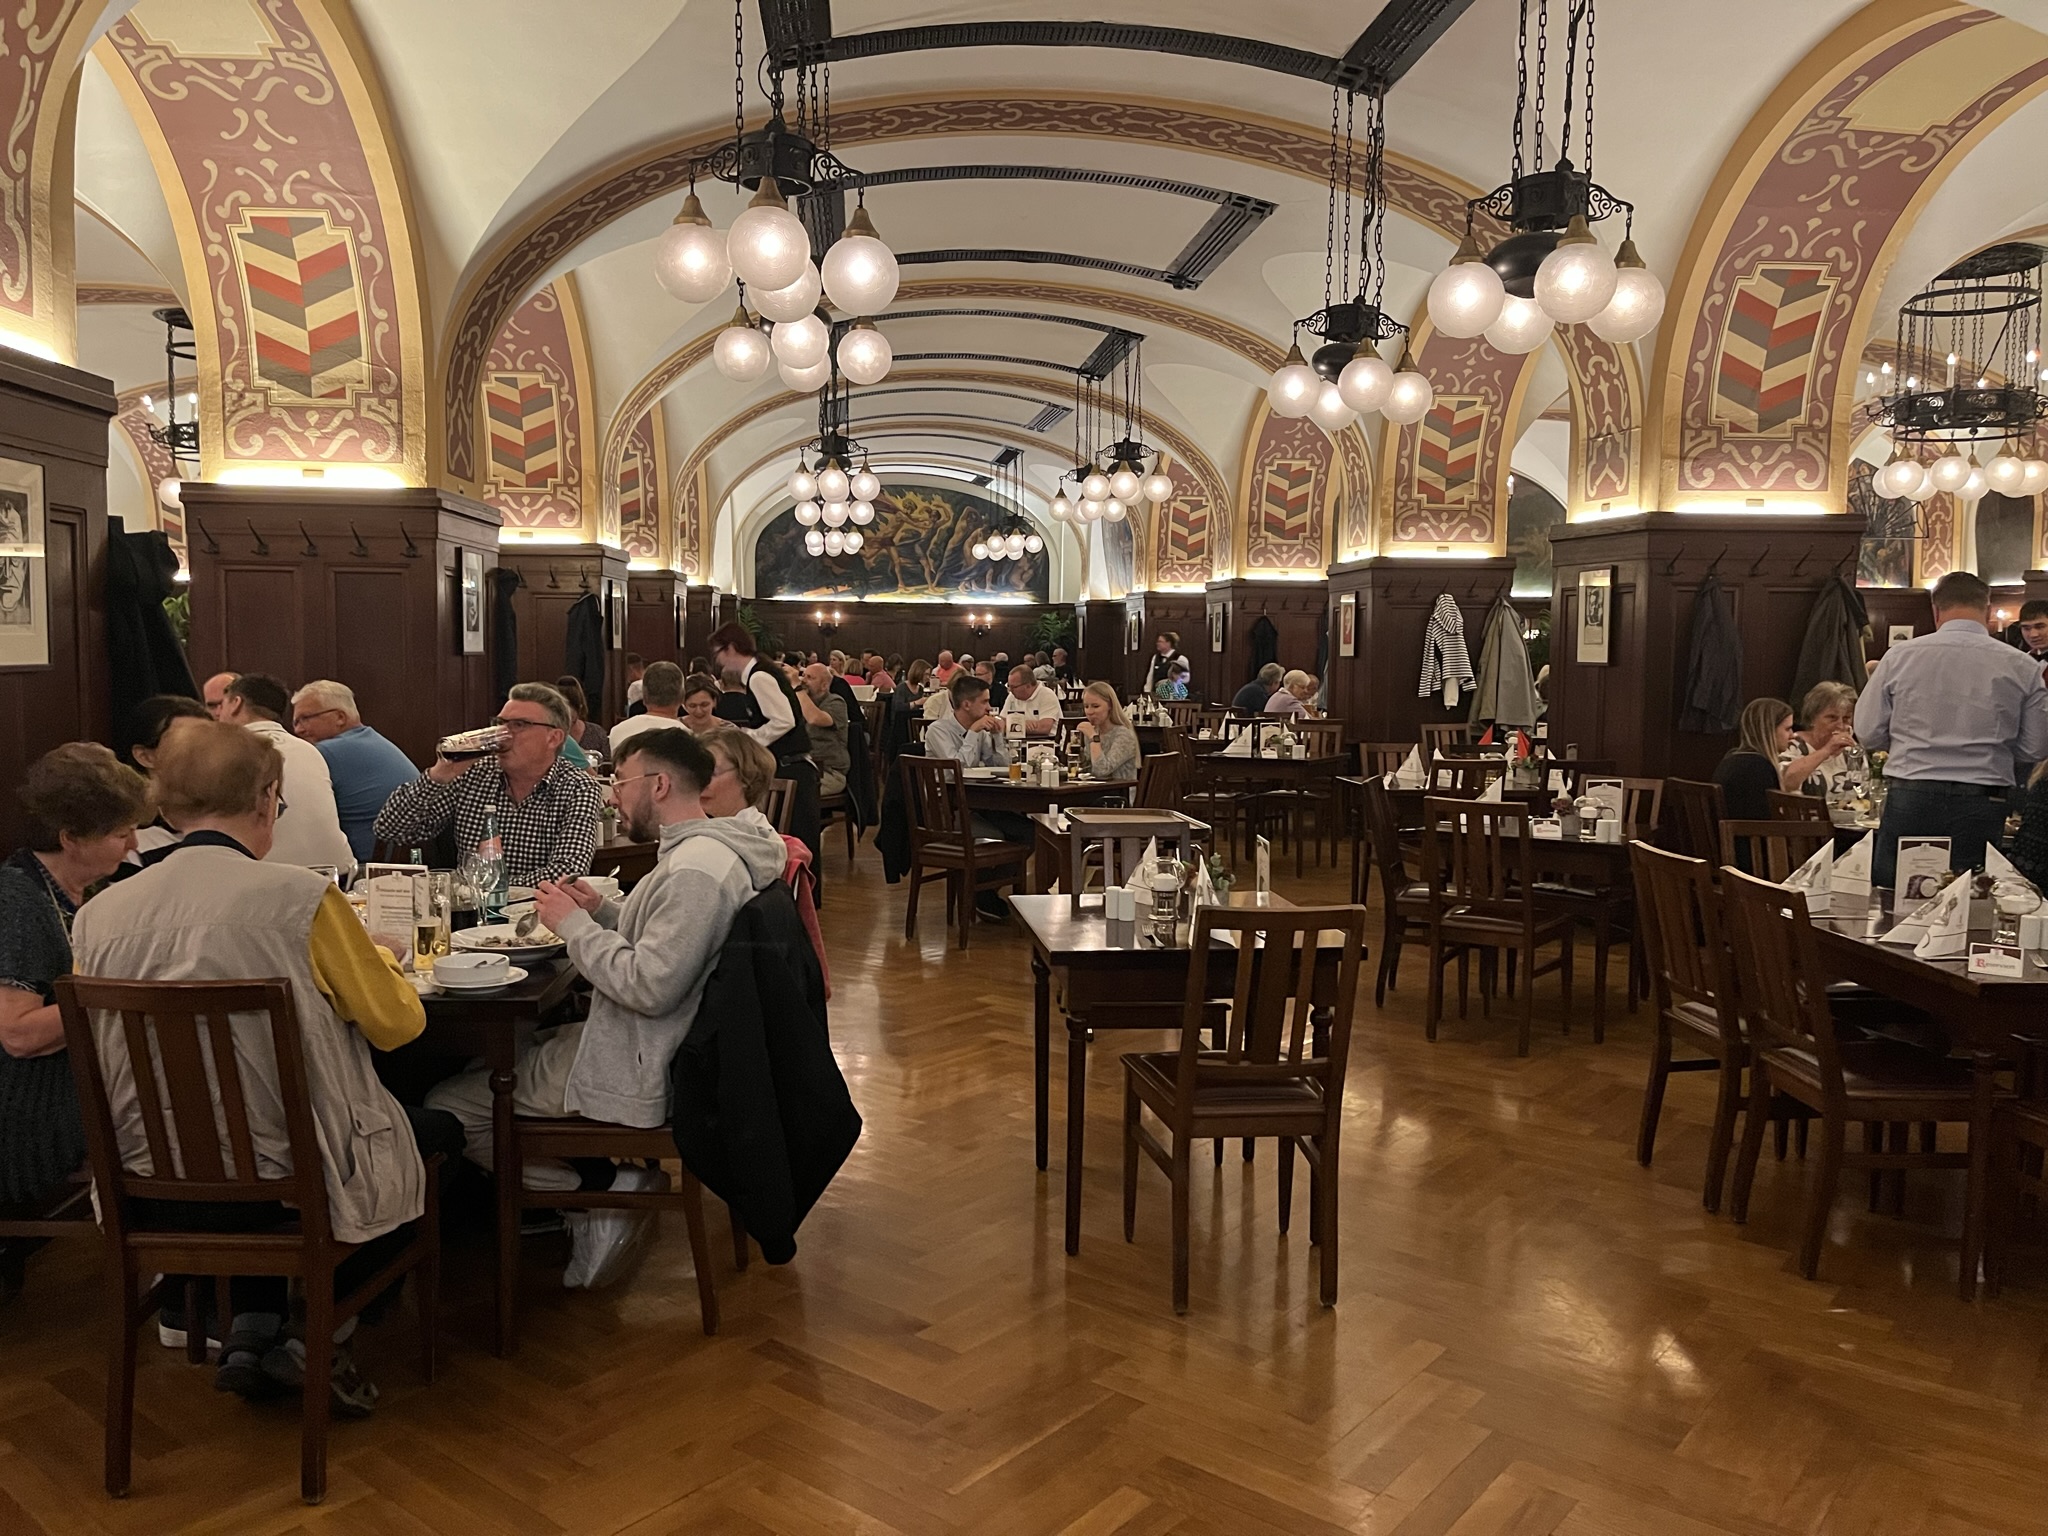 Goethe was a regular guest at Auerbach’s Keller while he studied law at the University of Leipzig. Themes from his Faust play are found throughout the restaurant.